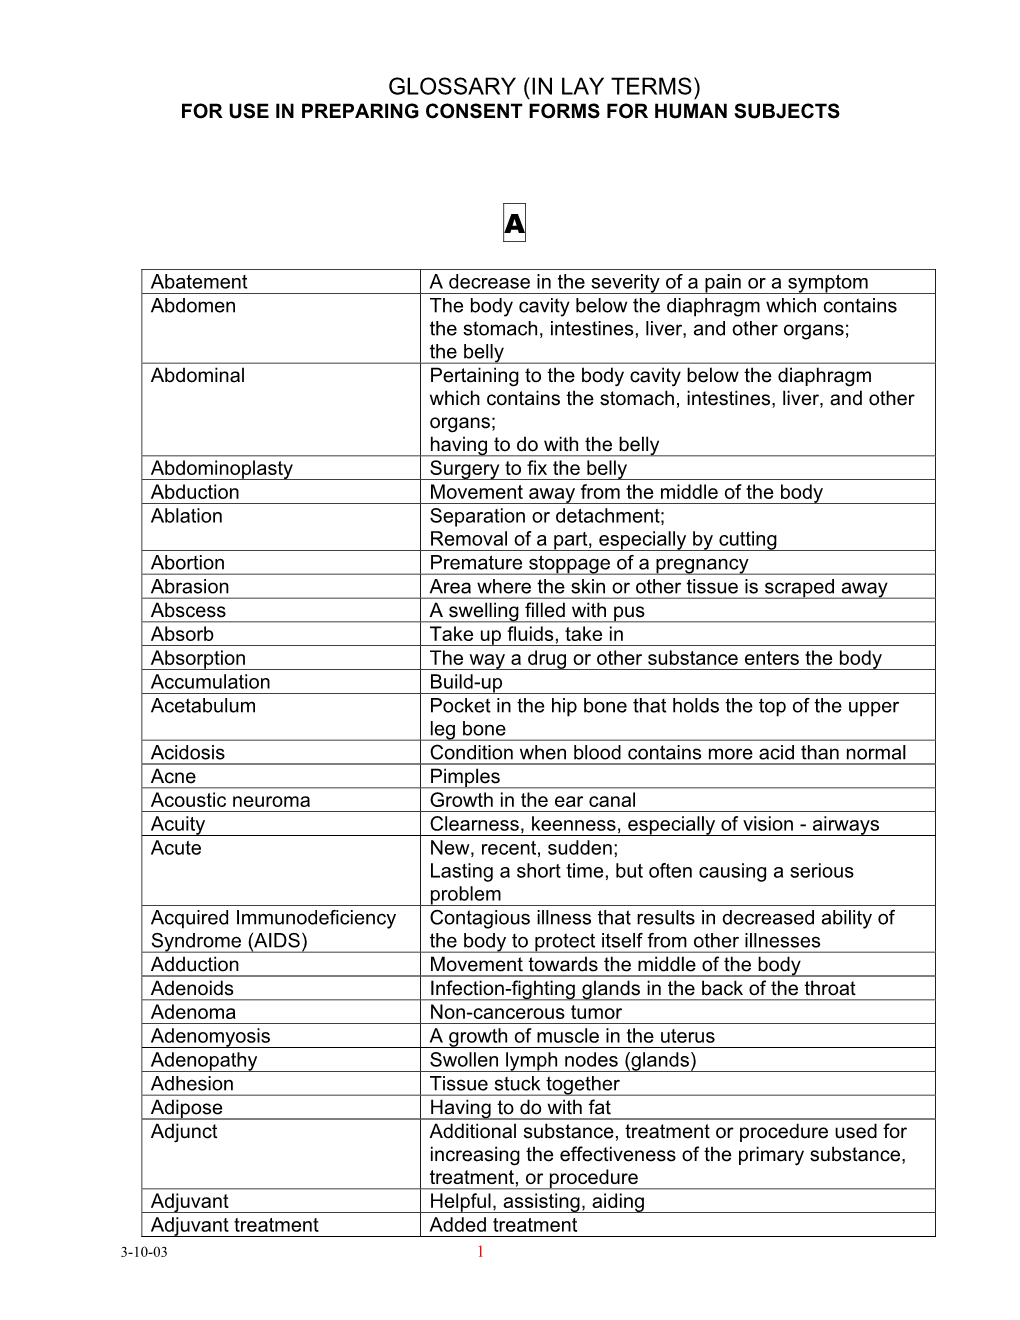 Glossary (In Lay Terms) for Use in Preparing Consent Forms for Human Subjects